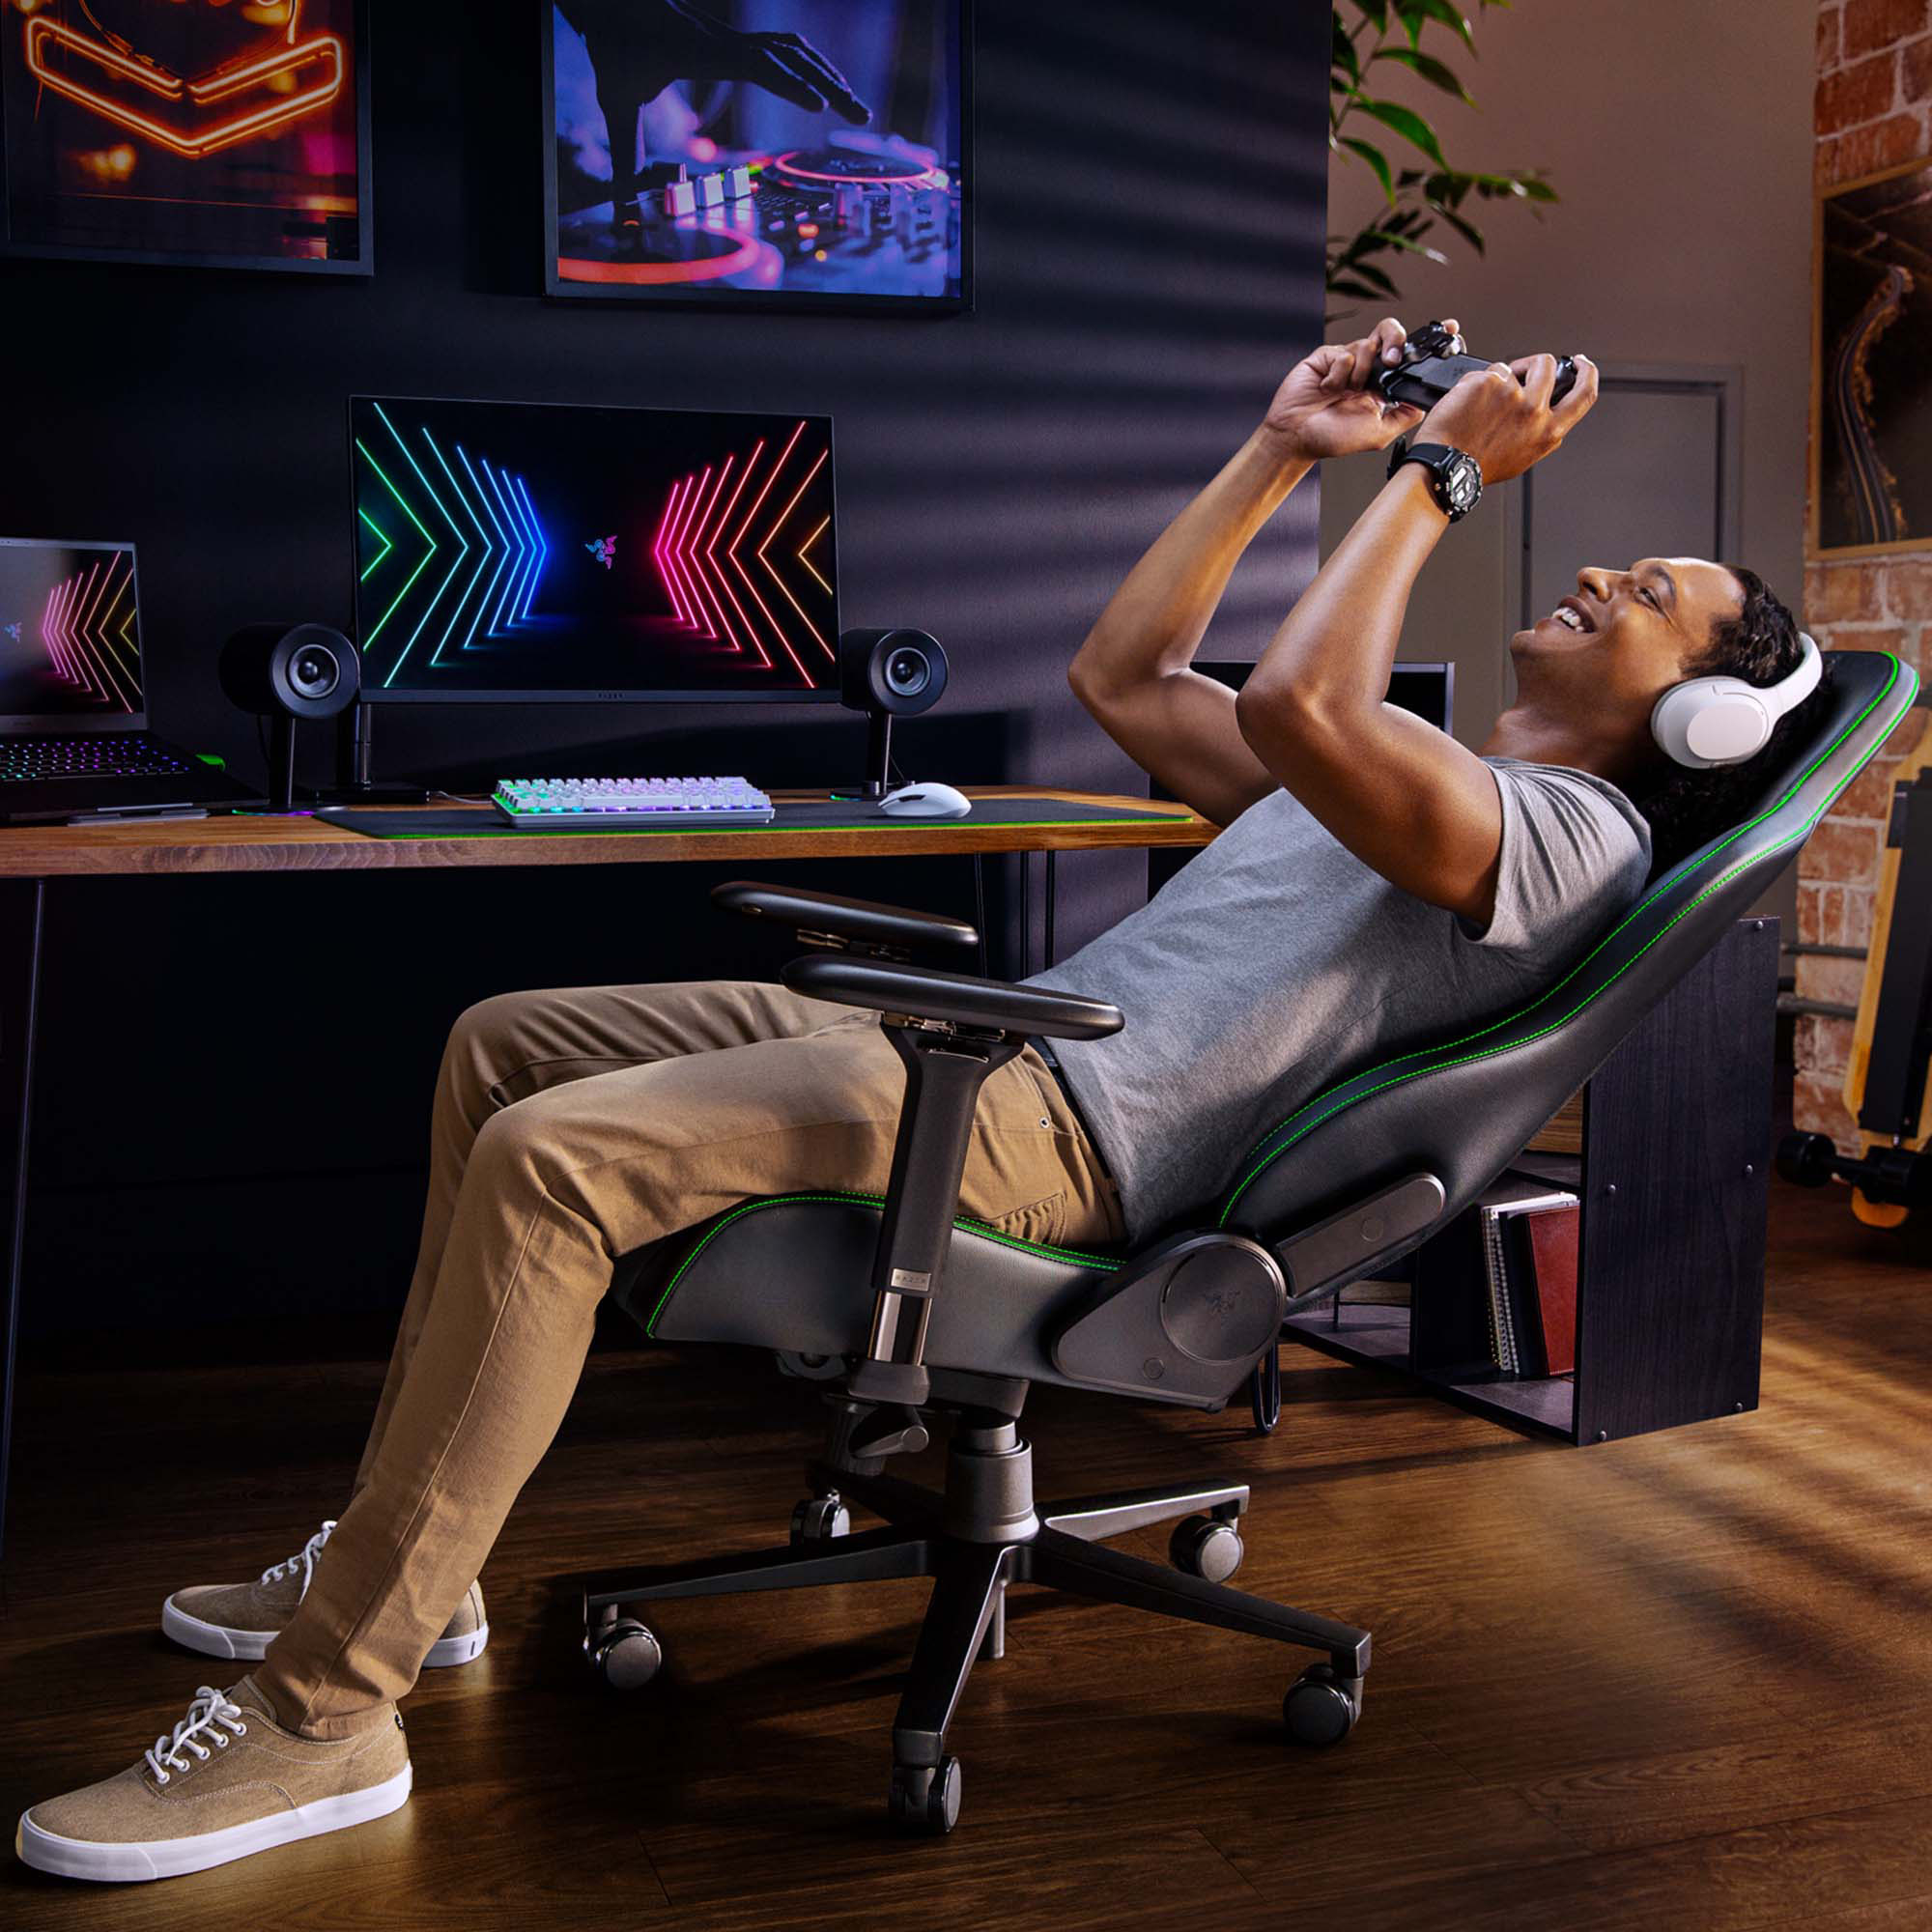 Game Chair With Linkage Armrest All-day Gaming Comfort - Optimized